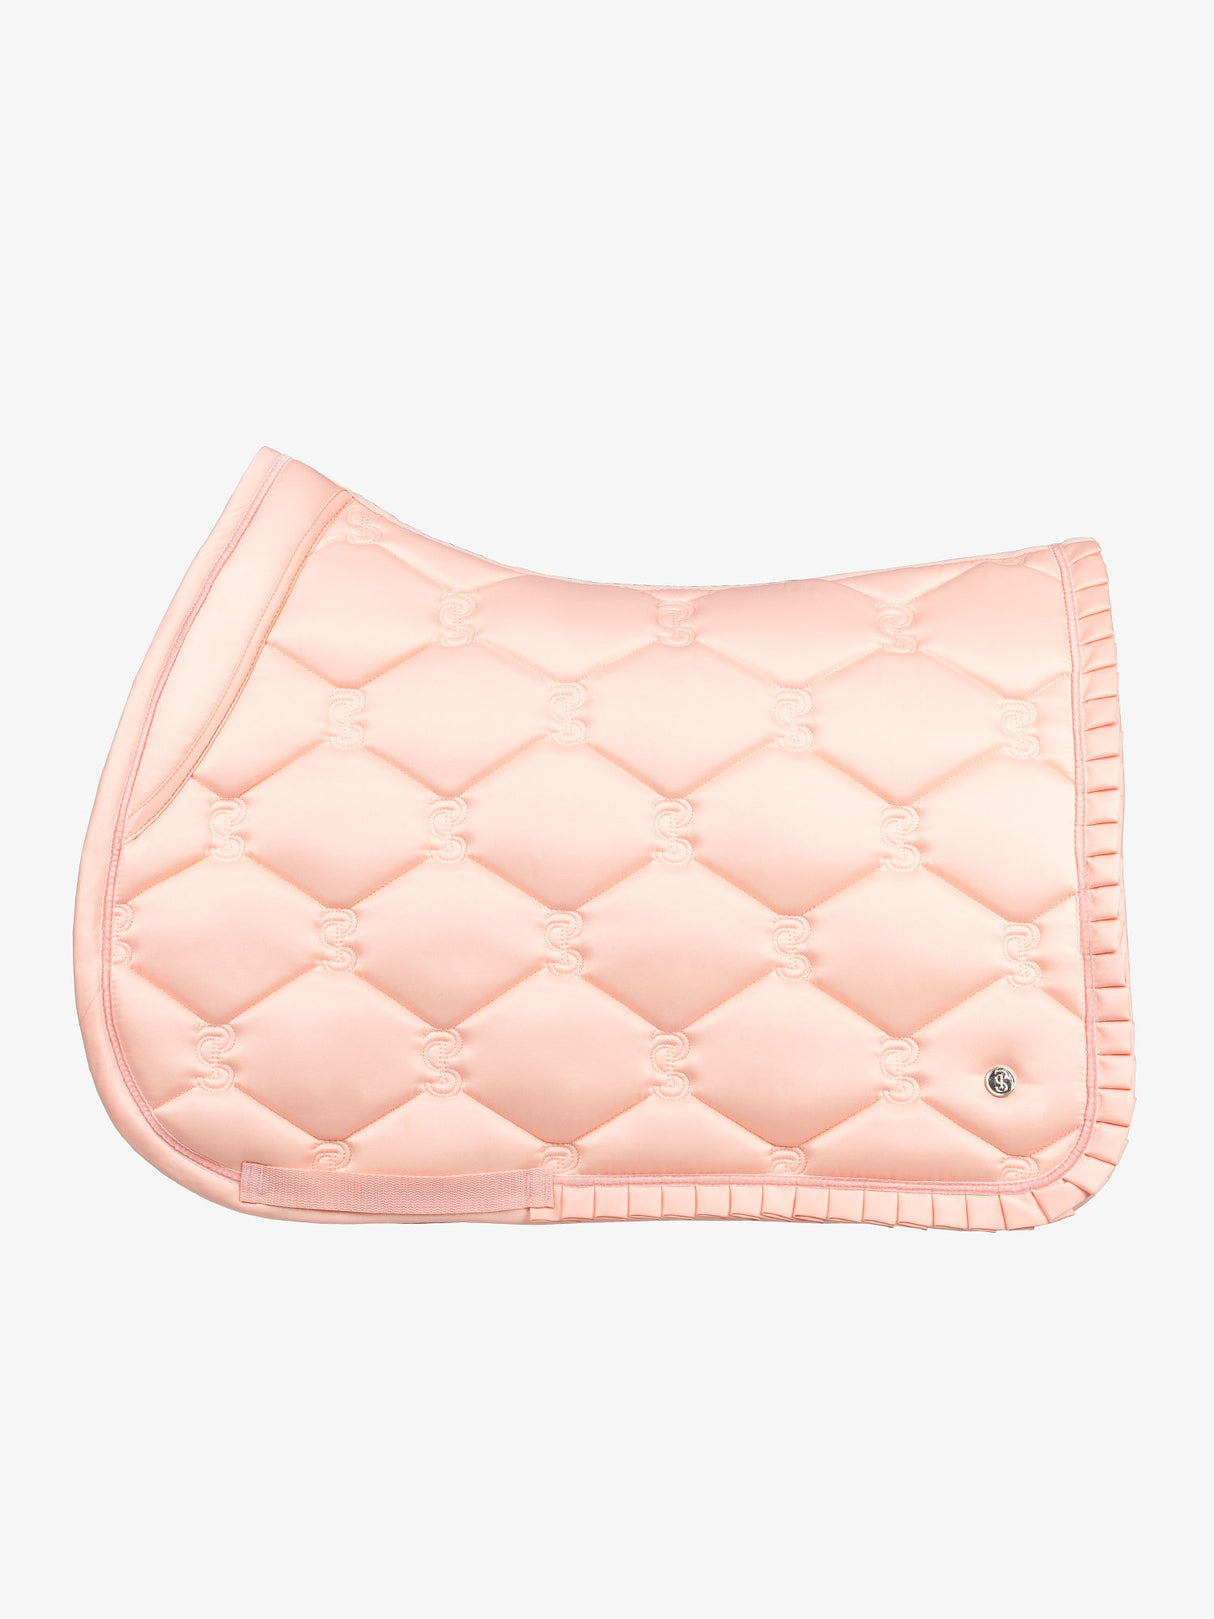 PS of Sweden Ruffle Jump Saddle Pad Peach